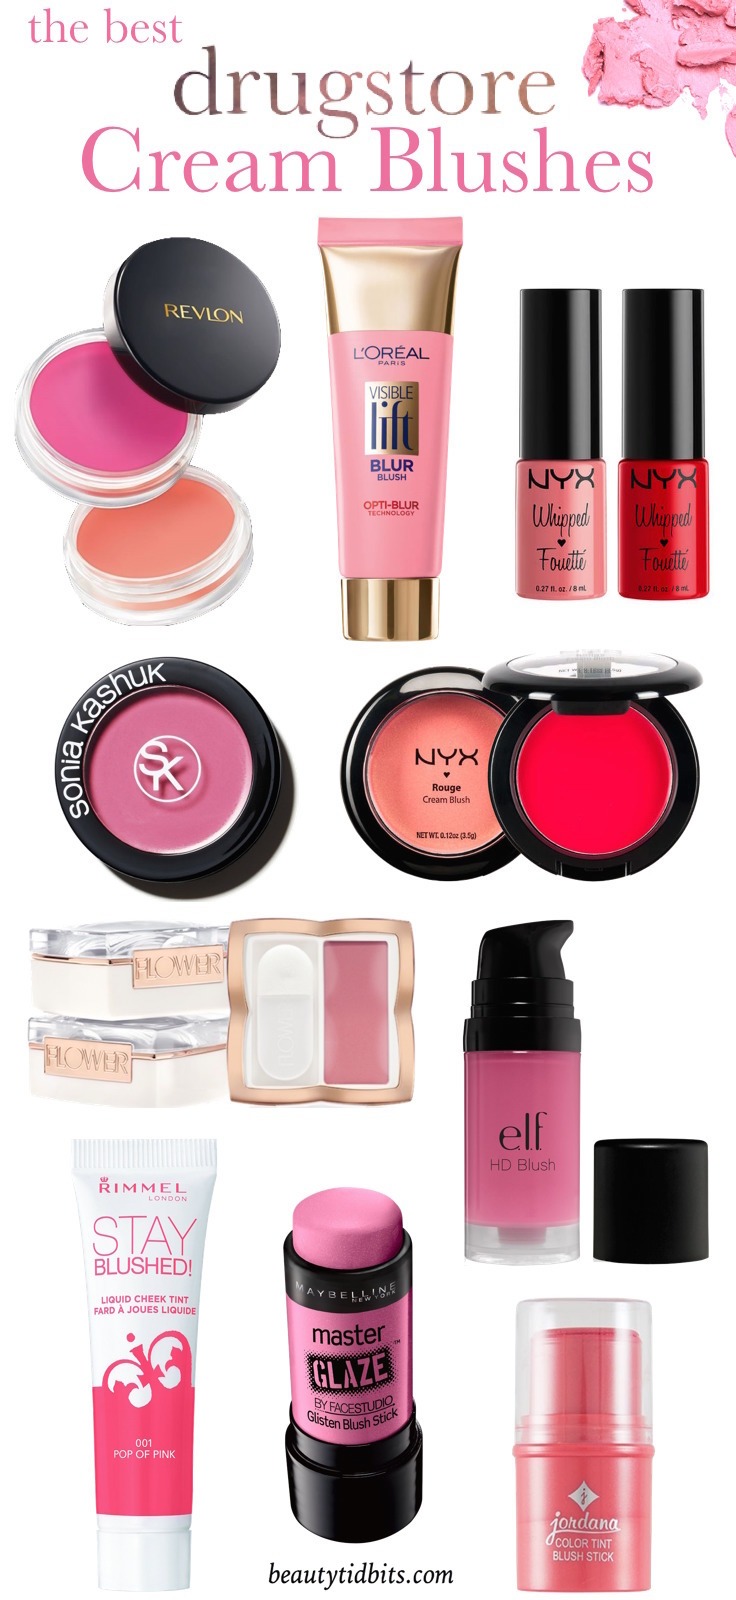 From Revlon to Rimmel, here are the best drugstore cream blush picks that give you the best bang for your buck!